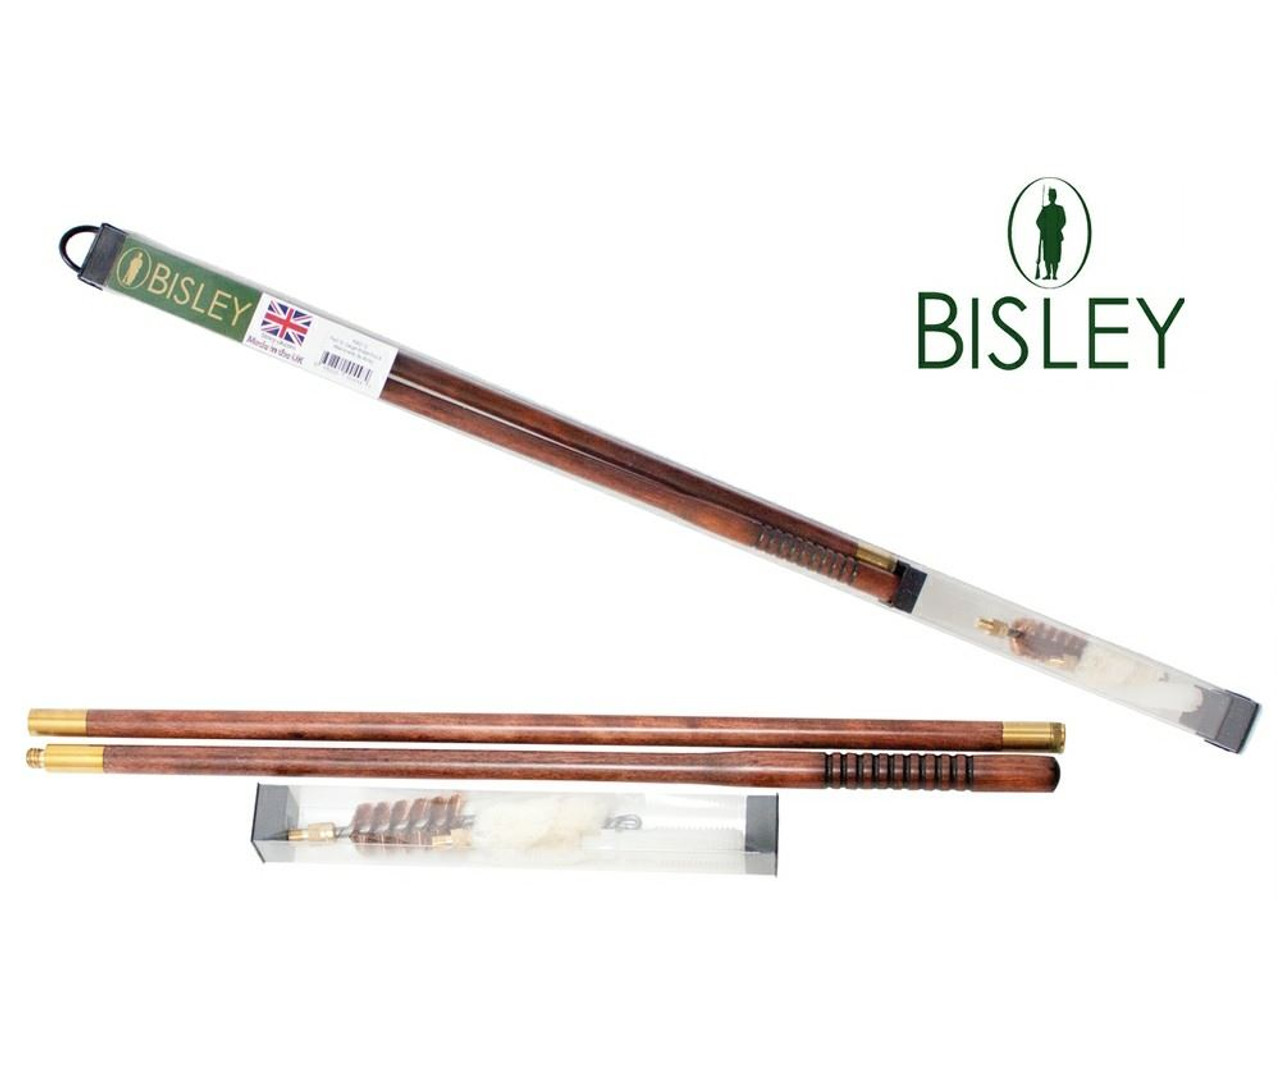 Bisley 20 Gauge Cleaning Kit 2 Part Wooden Rod & Attachments